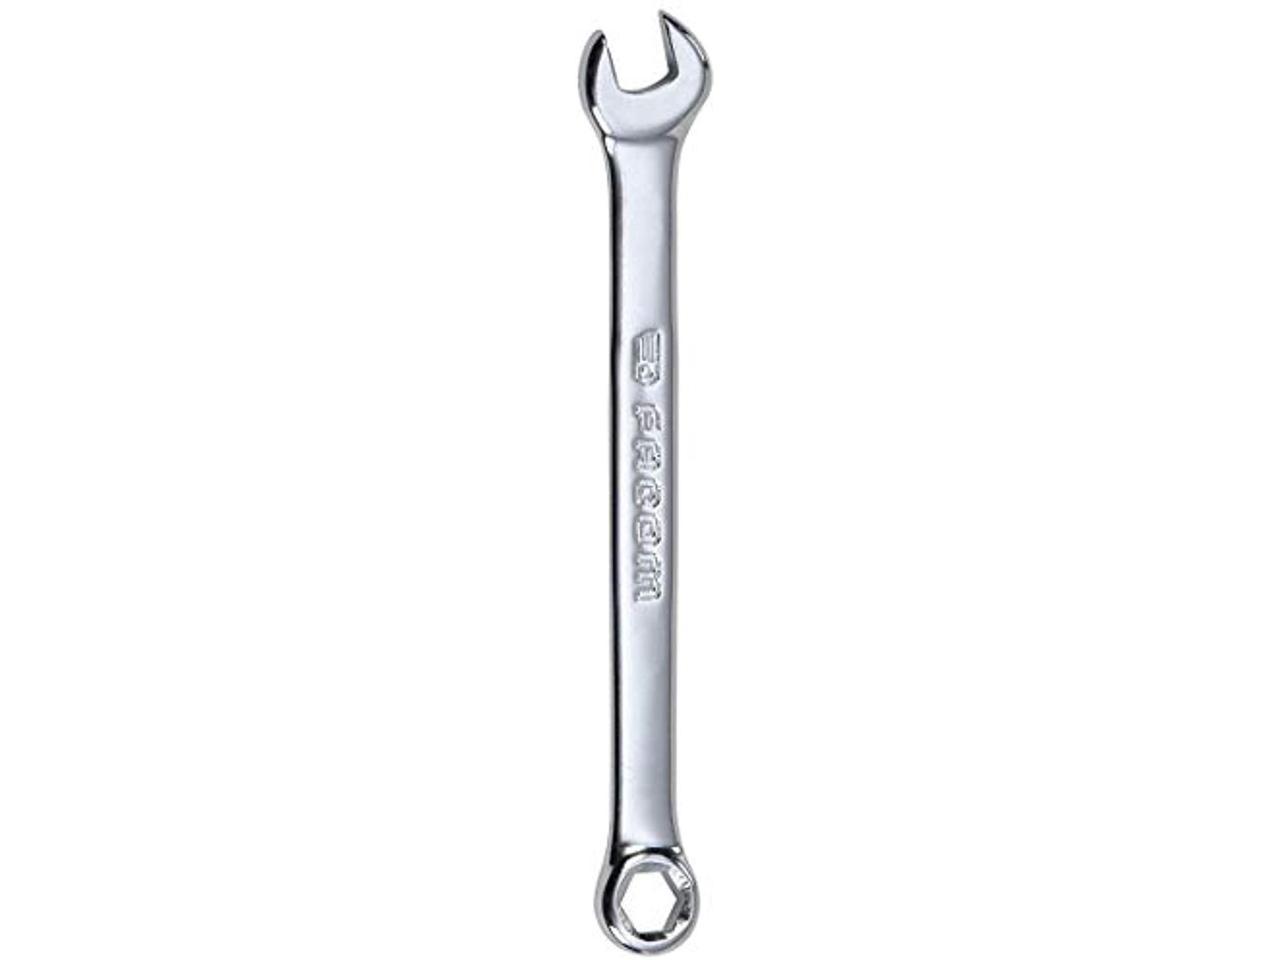 FM-45.34 FACOM FM-45.34 FACOM Open End Wrench,34mm Head Size 